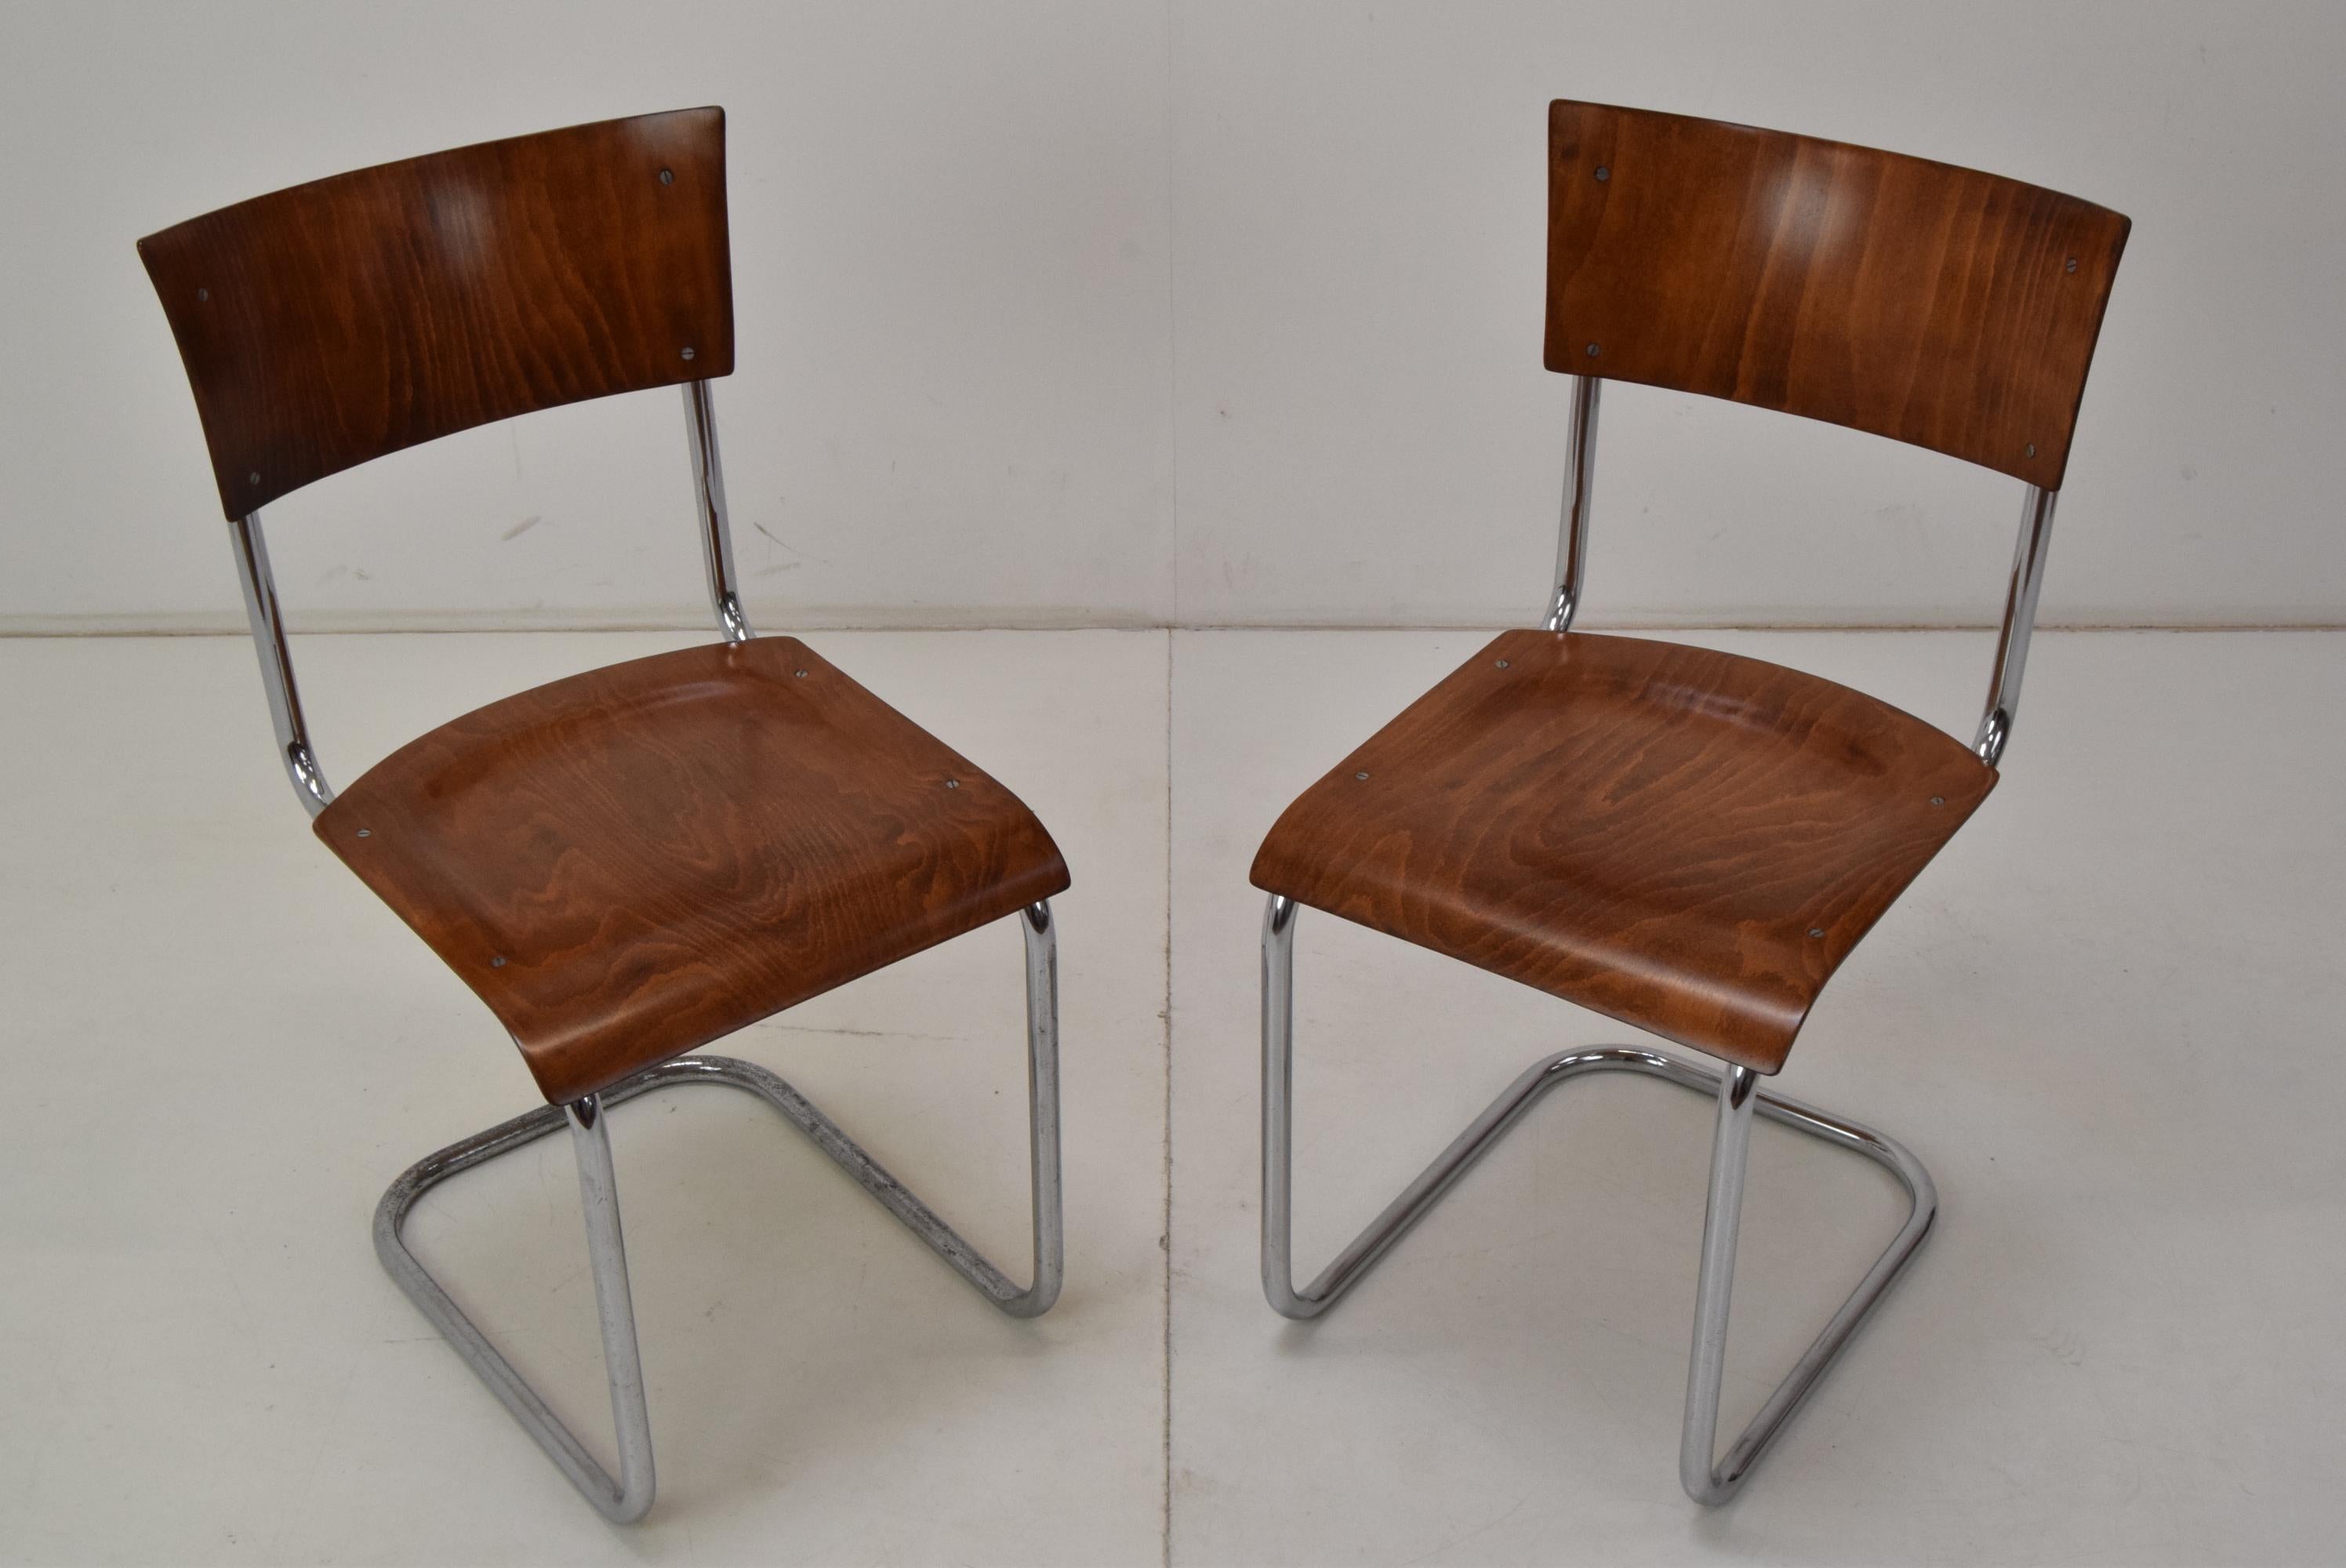 Czech Pair of Art Deco Chairs, Designed by Mart Stam, 1930´s For Sale